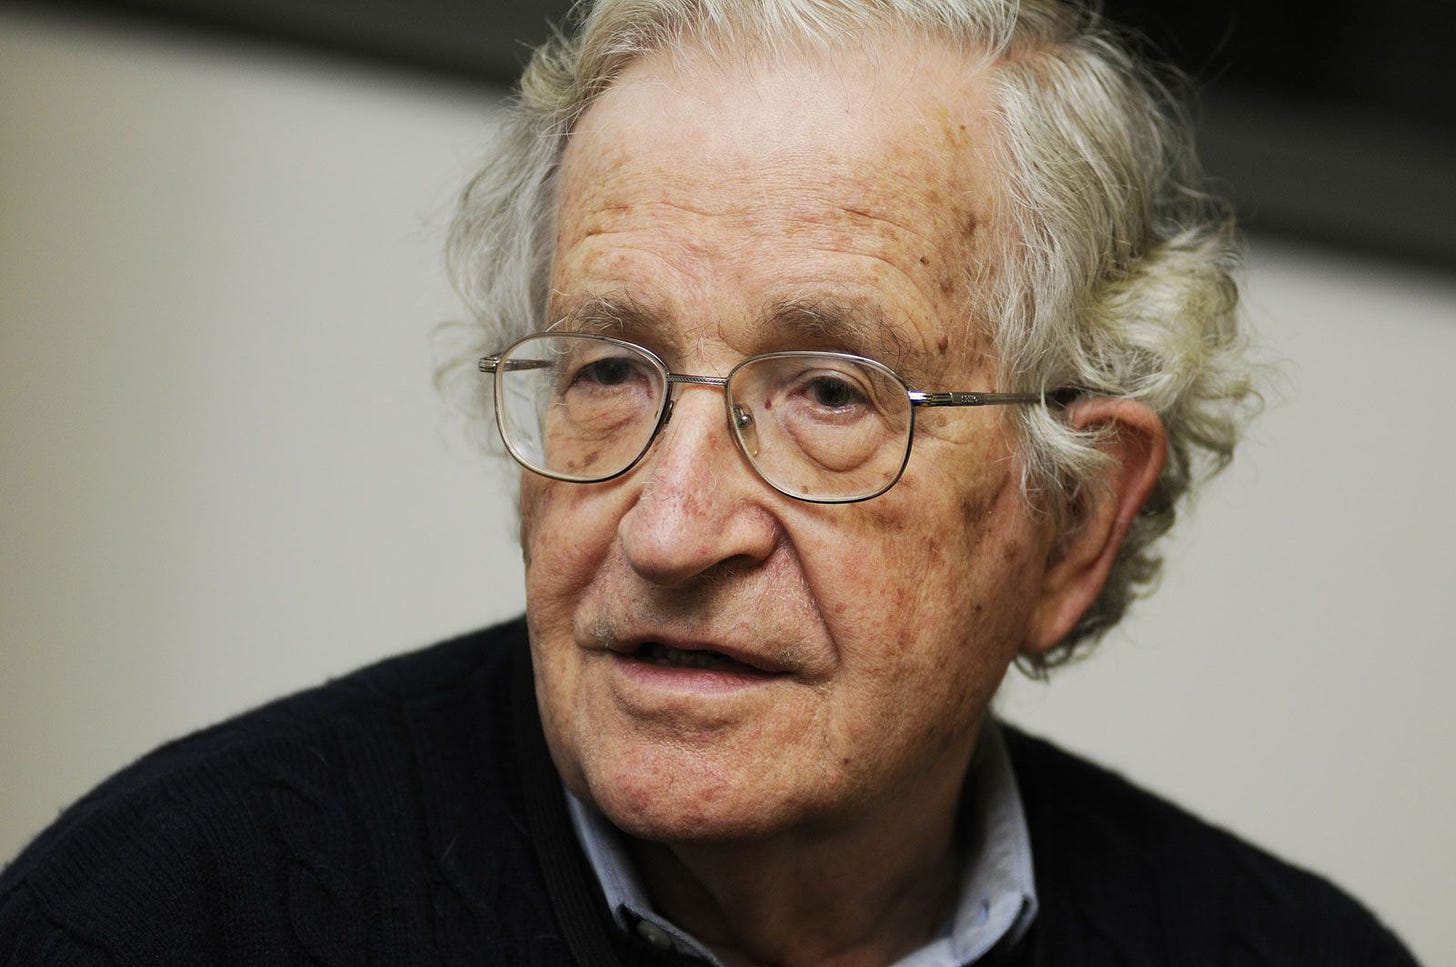 Noam Chomsky | Biography, Theories, Books, Psychology, & Facts | Britannica